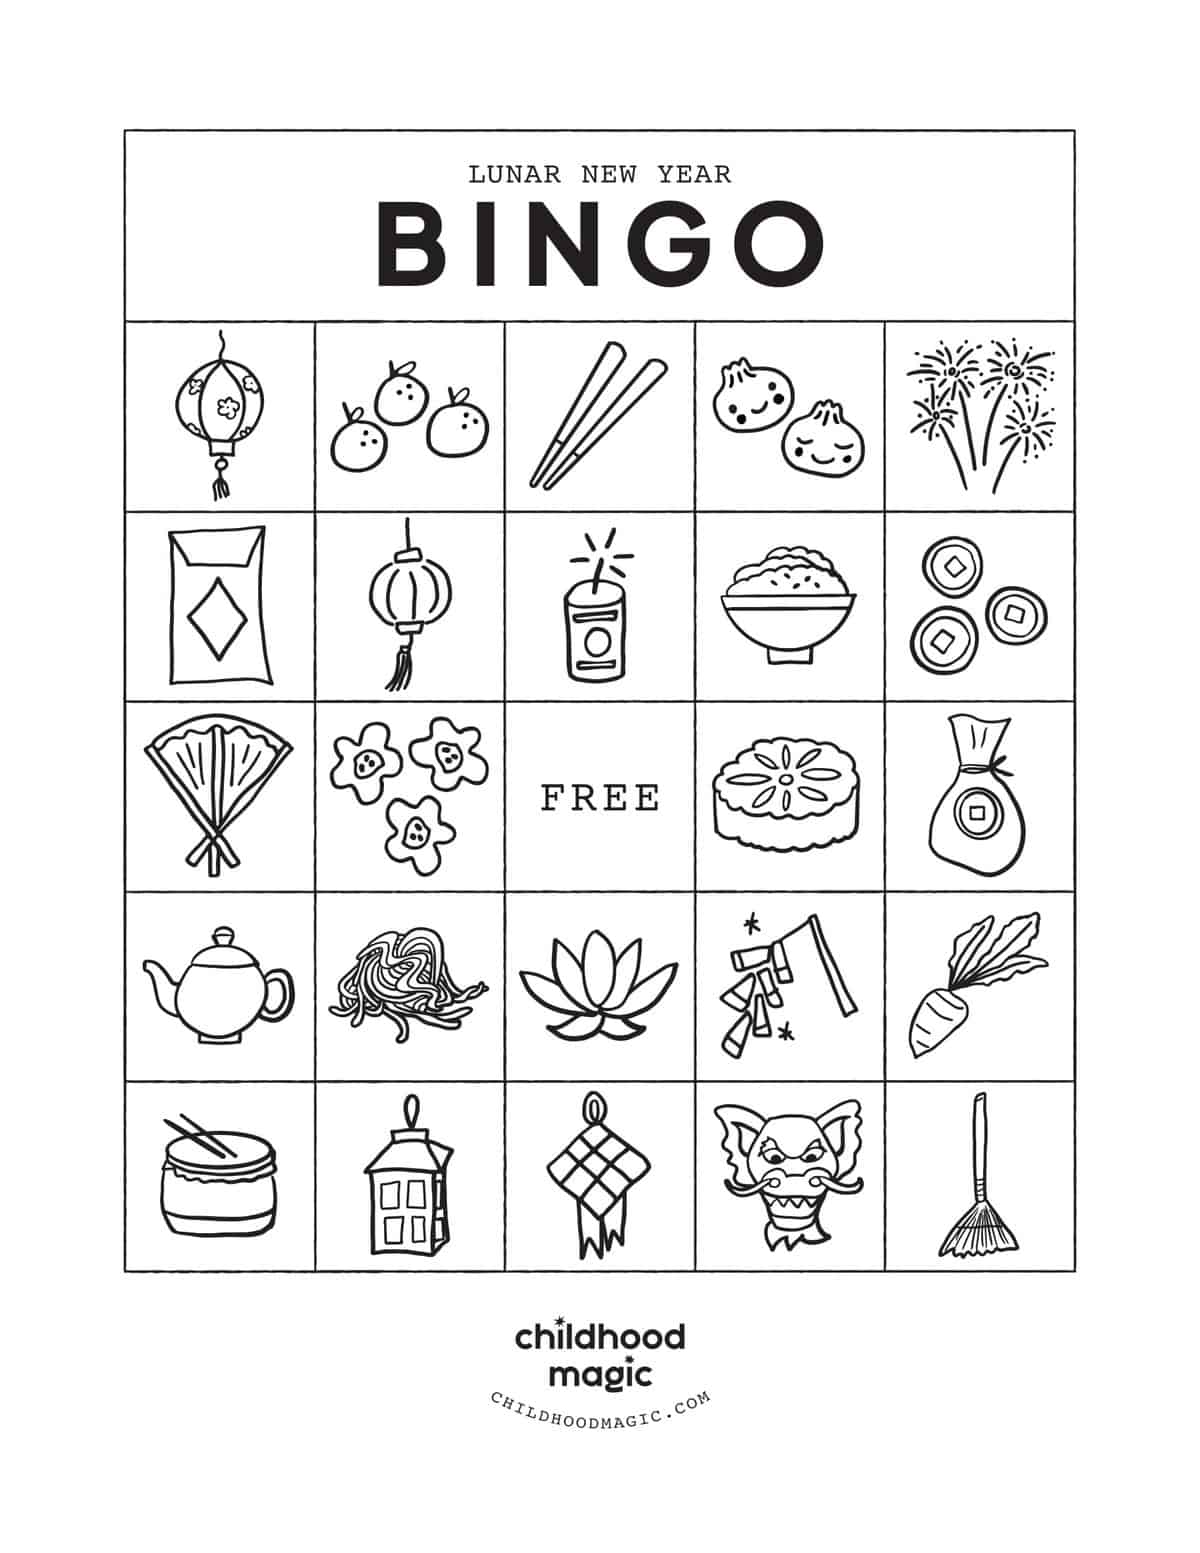 Lunar New Year Printable bingo card in black and white. 